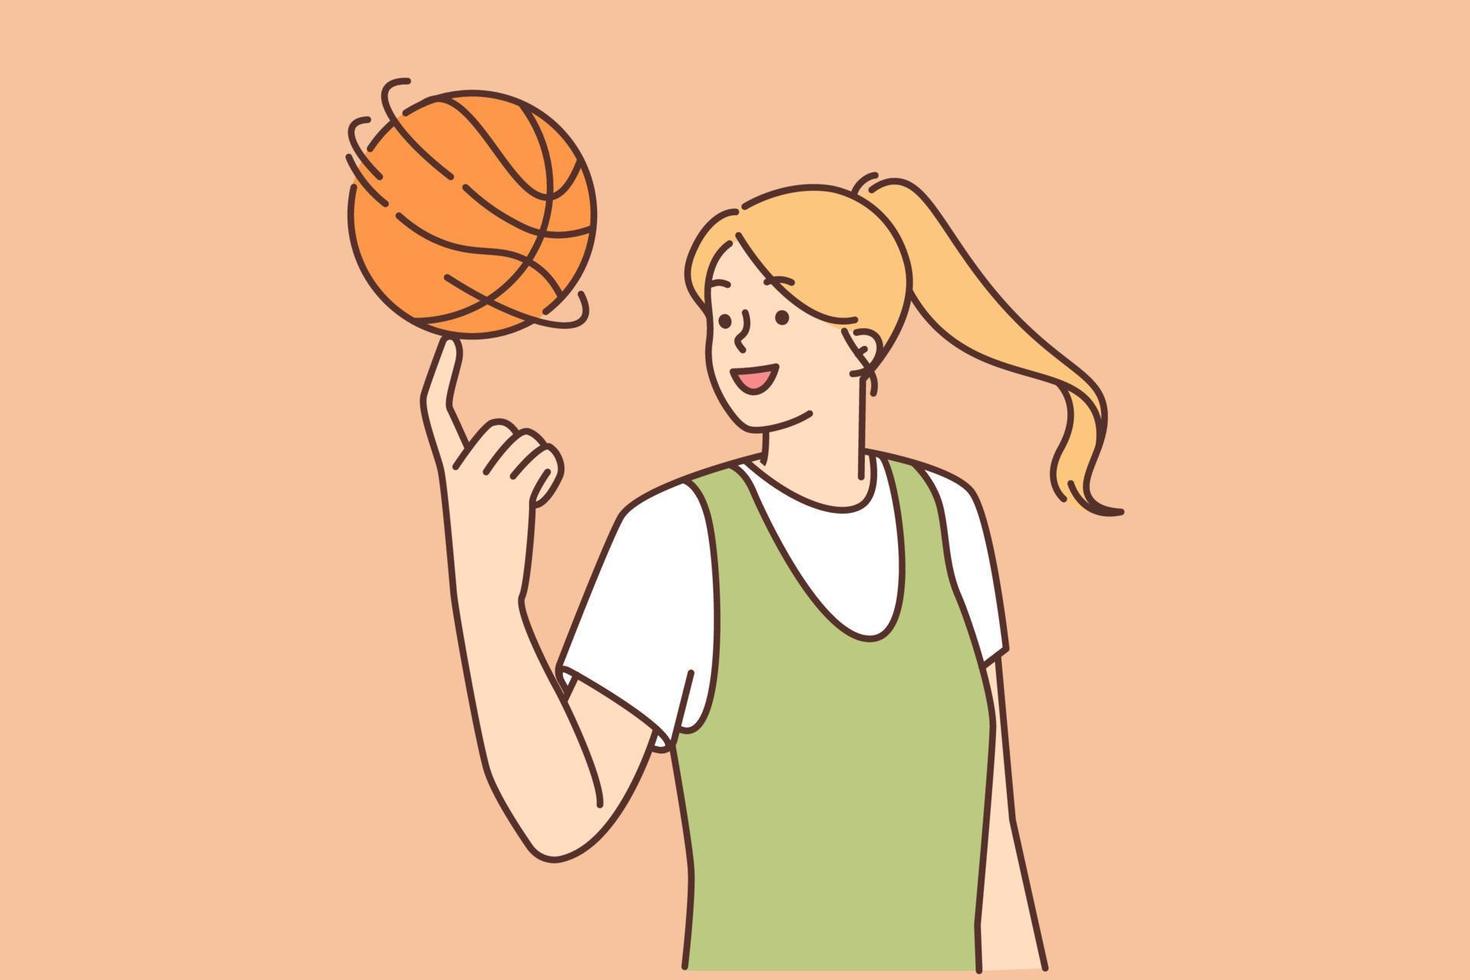 Smiling young woman spin basketball ball on finger. Happy female athlete or player have fun playing game outdoors. Sport and hobby. Vector illustration.